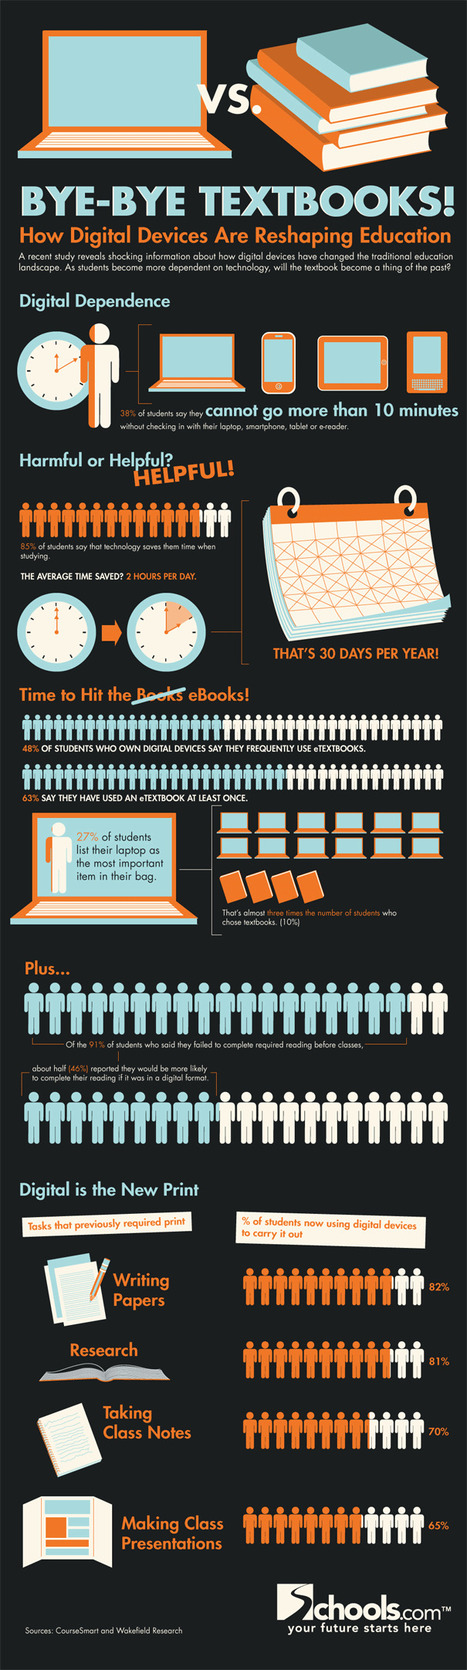 Bye-Bye Textbooks! How Digital Devices Are Reshaping Education Infographic | Strictly pedagogical | Scoop.it